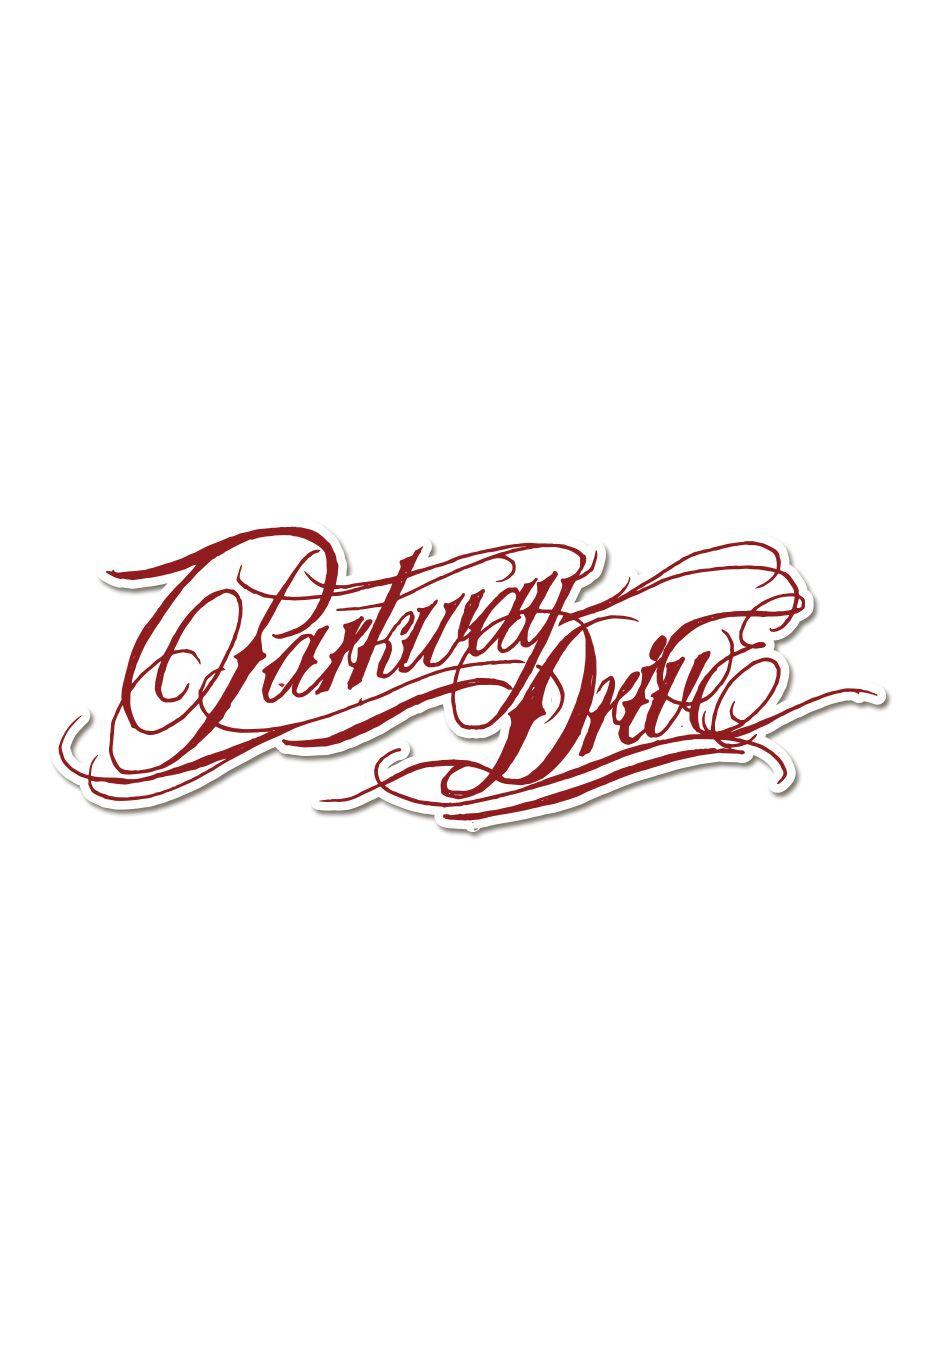 Parkway Drive Ire Logo - Parkway Drive - Ire Cover White Vinyl Special Pack - T-Shirt - CDs ...